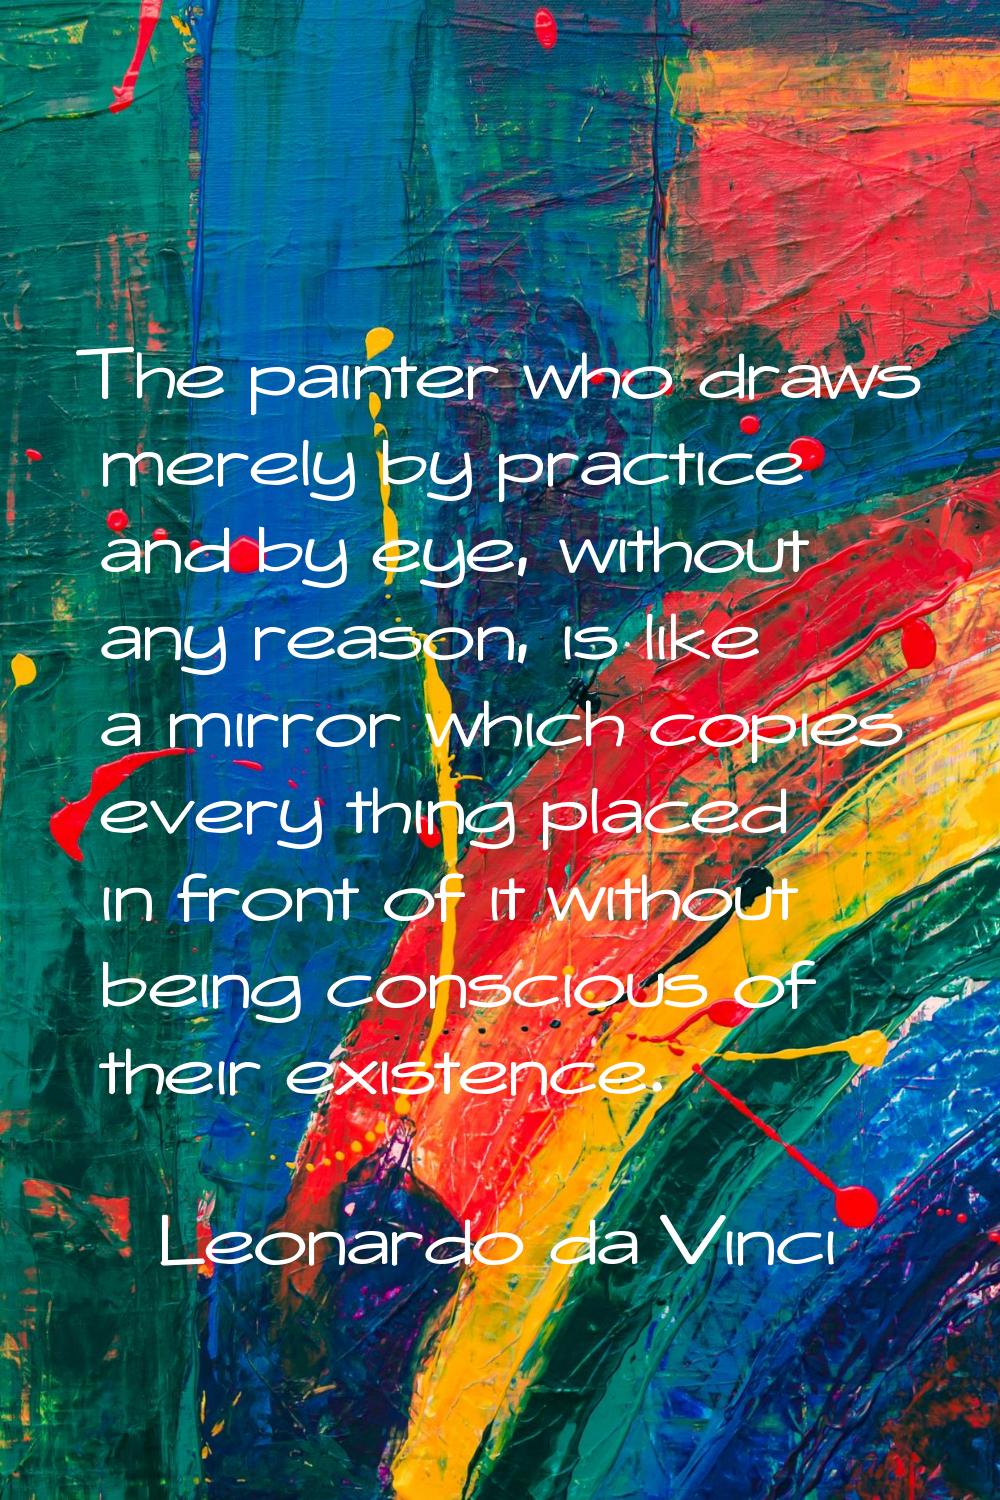 The painter who draws merely by practice and by eye, without any reason, is like a mirror which cop